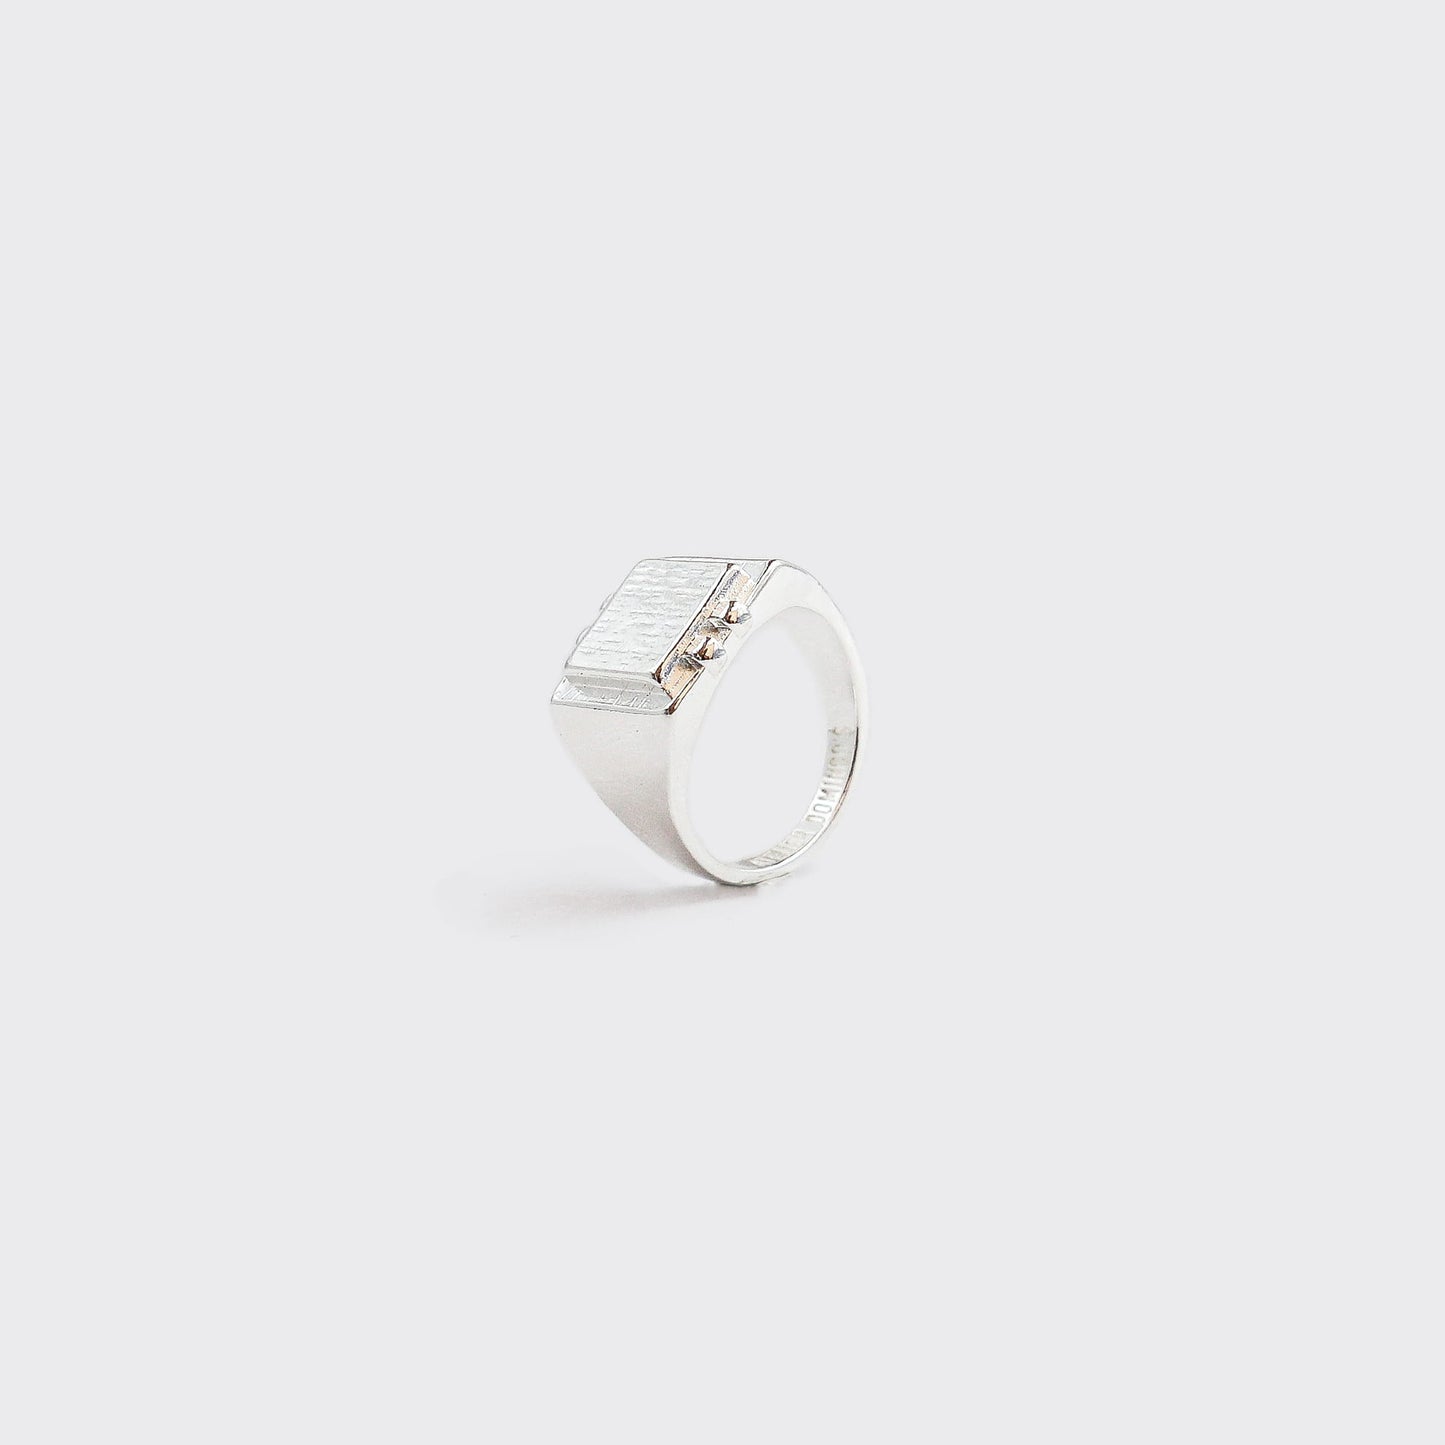 Atelier Domingo's Square ring is a promise of timeless elegance. This ring has been designed in France and is made in Spain, for both men and women. Handcrafted for a vintage finishing, this jewelry is made of a high-quality 925 Sterling silver plating.